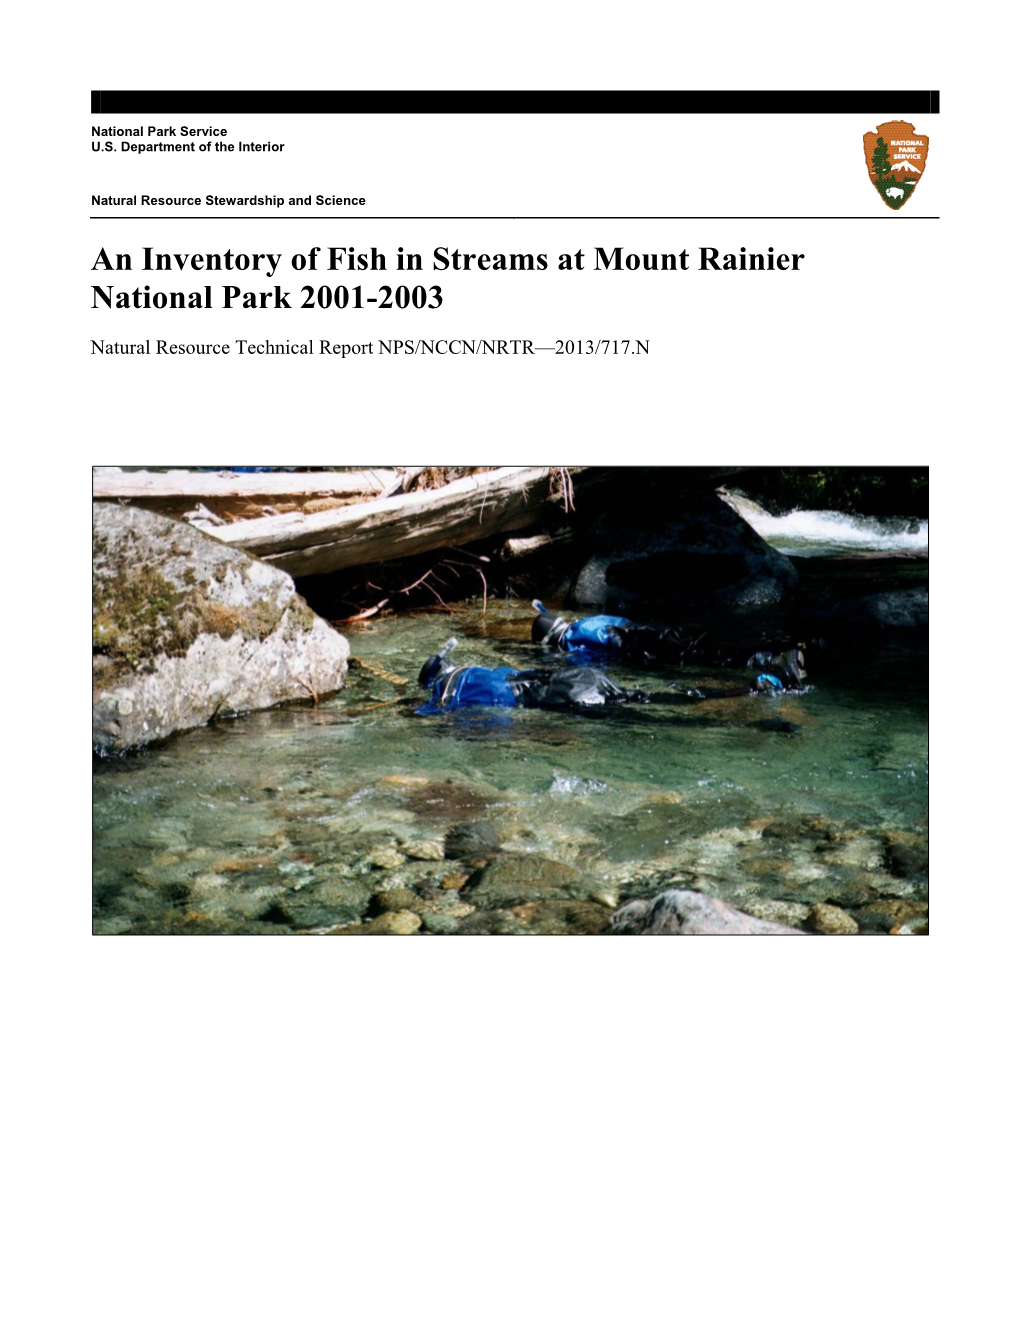 An Inventory of Fish in Streams in Mount Rainier National Park 2001-2003